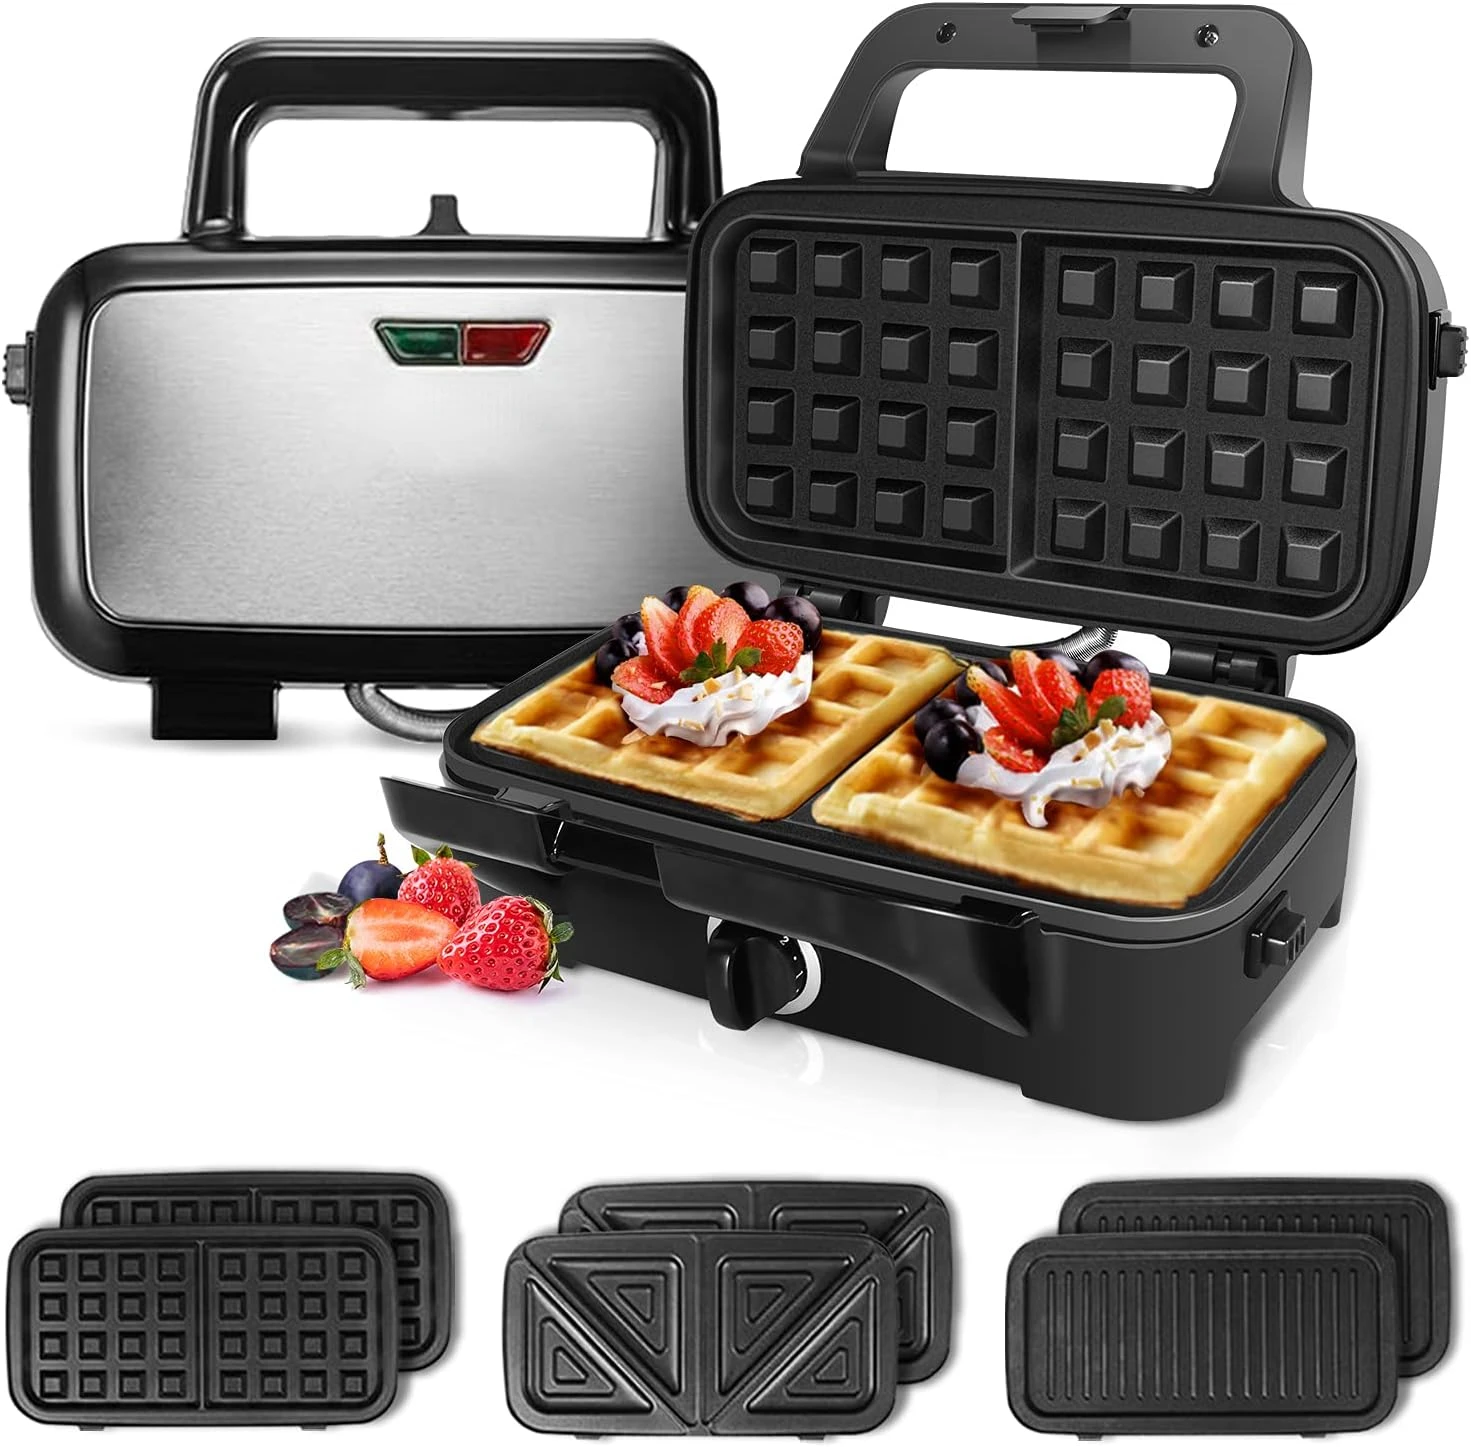 

Waffle Makers, 3-in-1 Waffle Iron Panini Press Sandwich Maker with Removable Plates, 5-gears Temperature Control Non Stick Coati